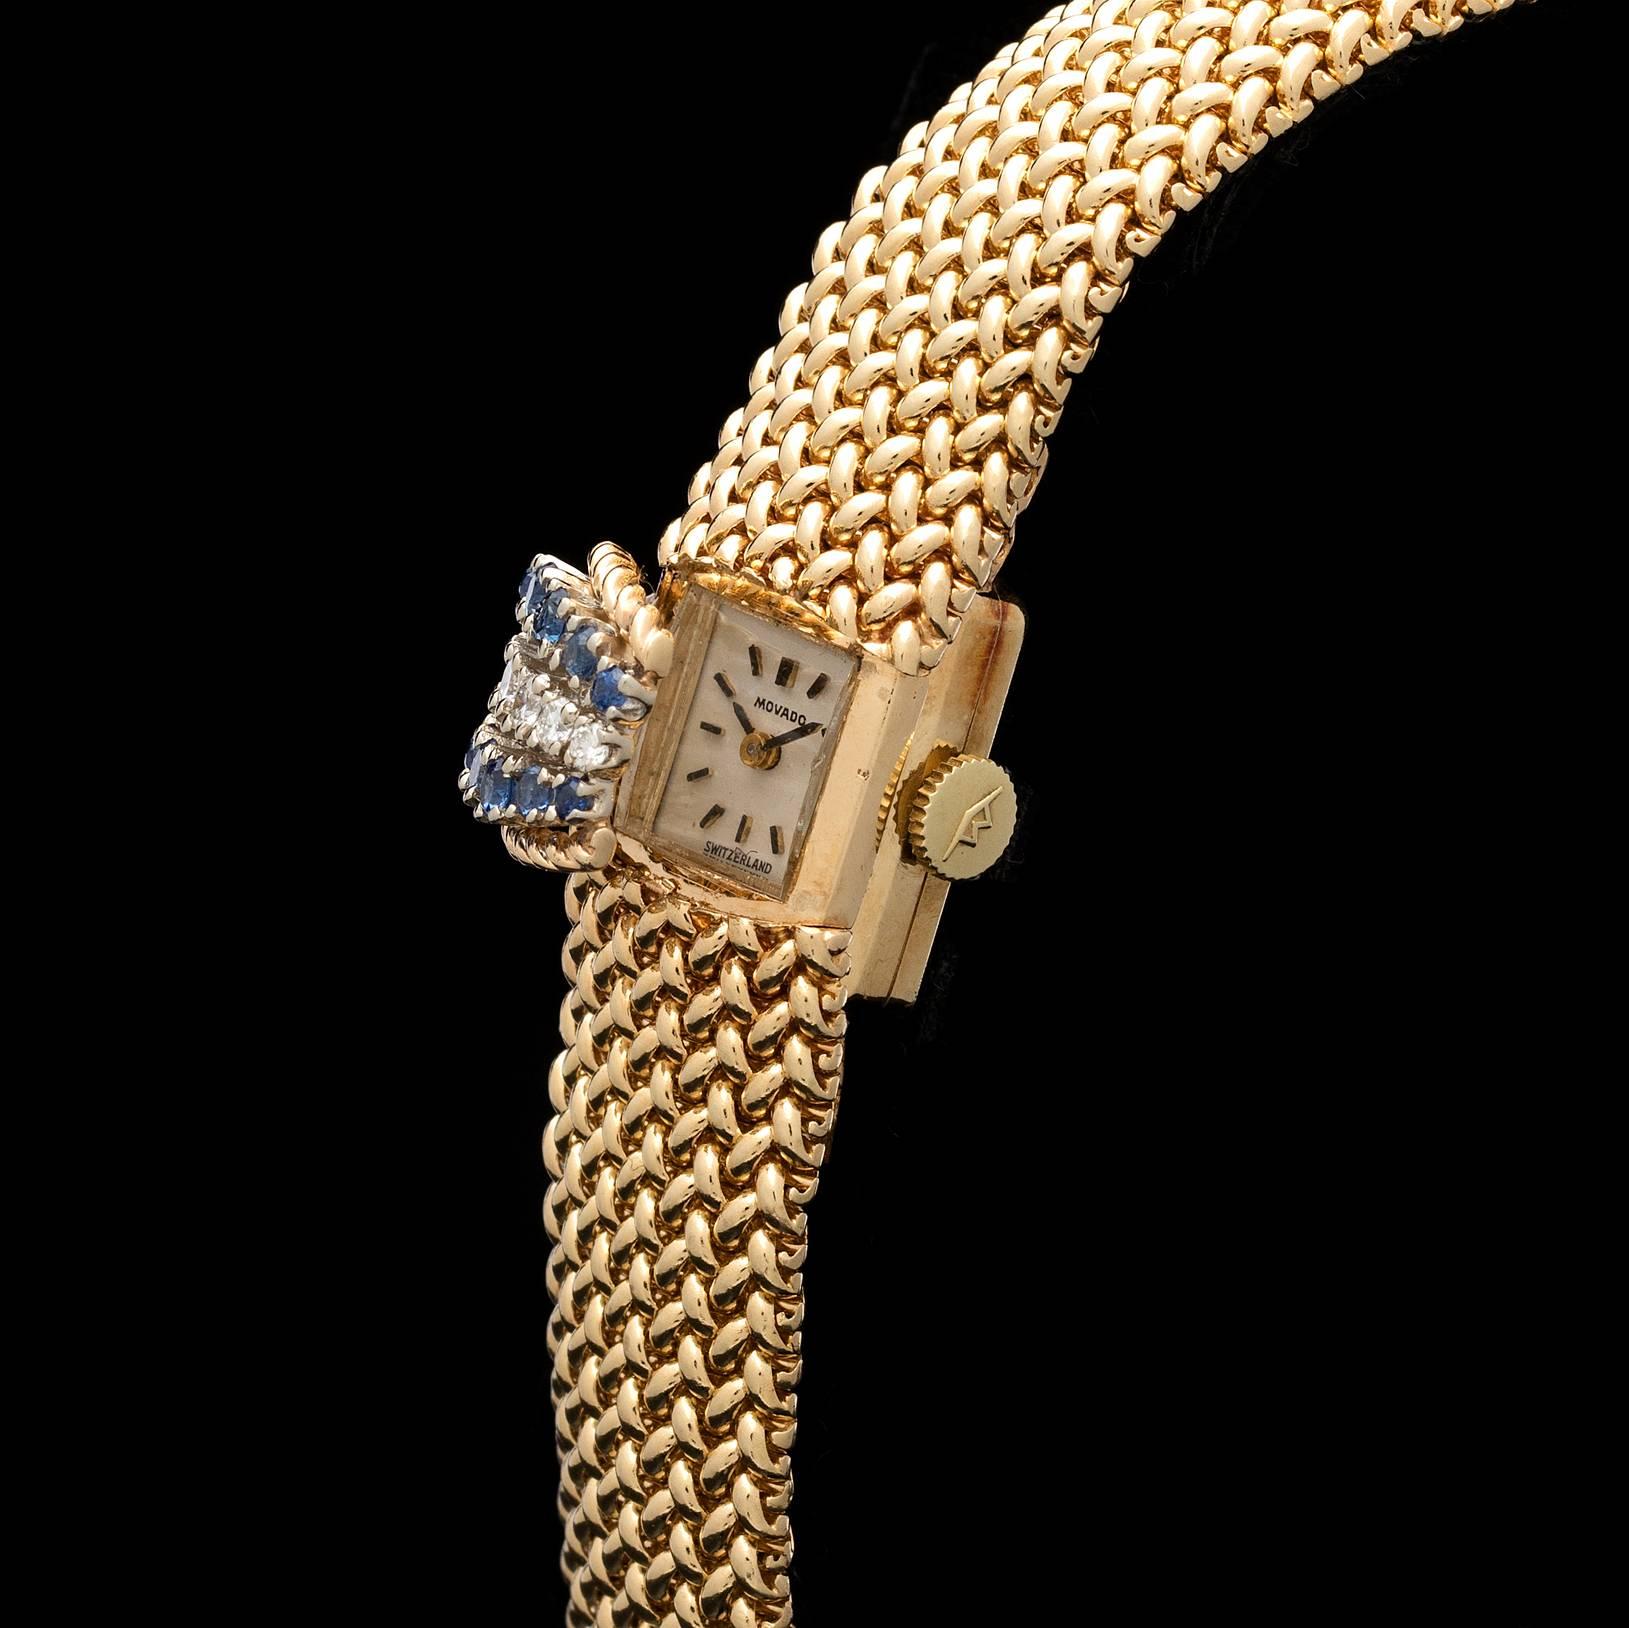 A fashionable 14k yellow gold vintage Movado timepiece with a manual wind Swiss movement.  The dial cover is adorned with 14 blue sapphires and 7 diamonds.  The mesh bracelet is 9/16 of an inch wide and 6 1/2 inches long.  This piece totals 39.1